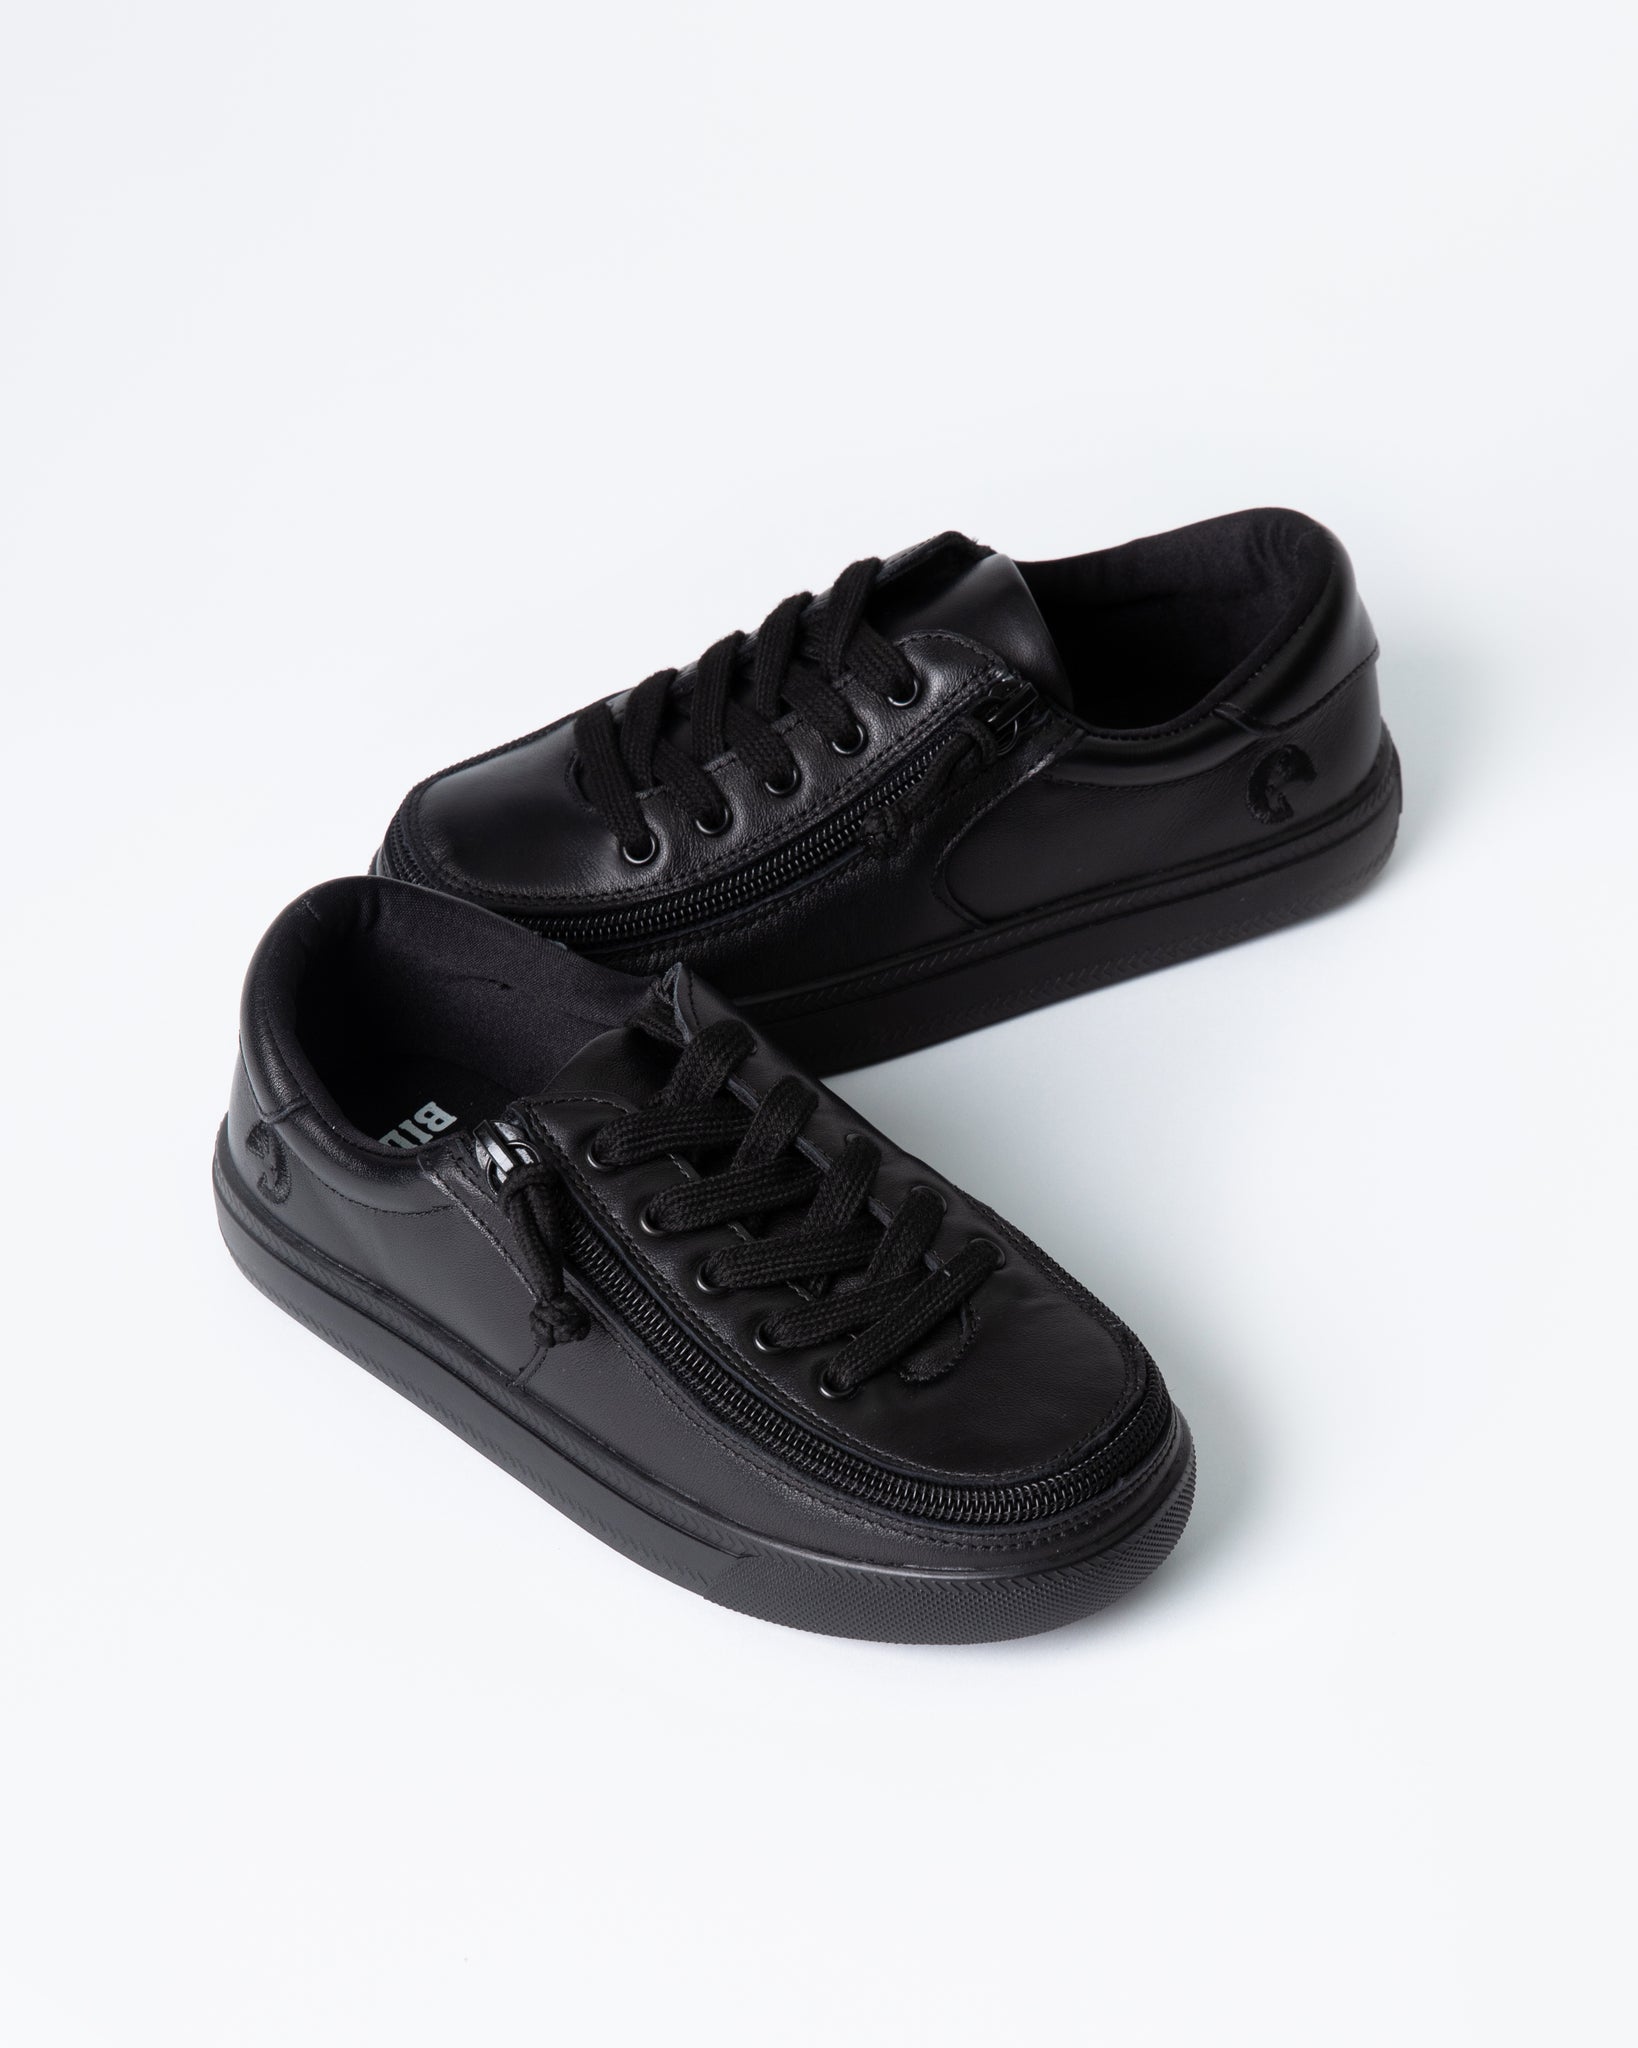 Low Rise Sneaker (Toddler) - Black to the Floor Leather